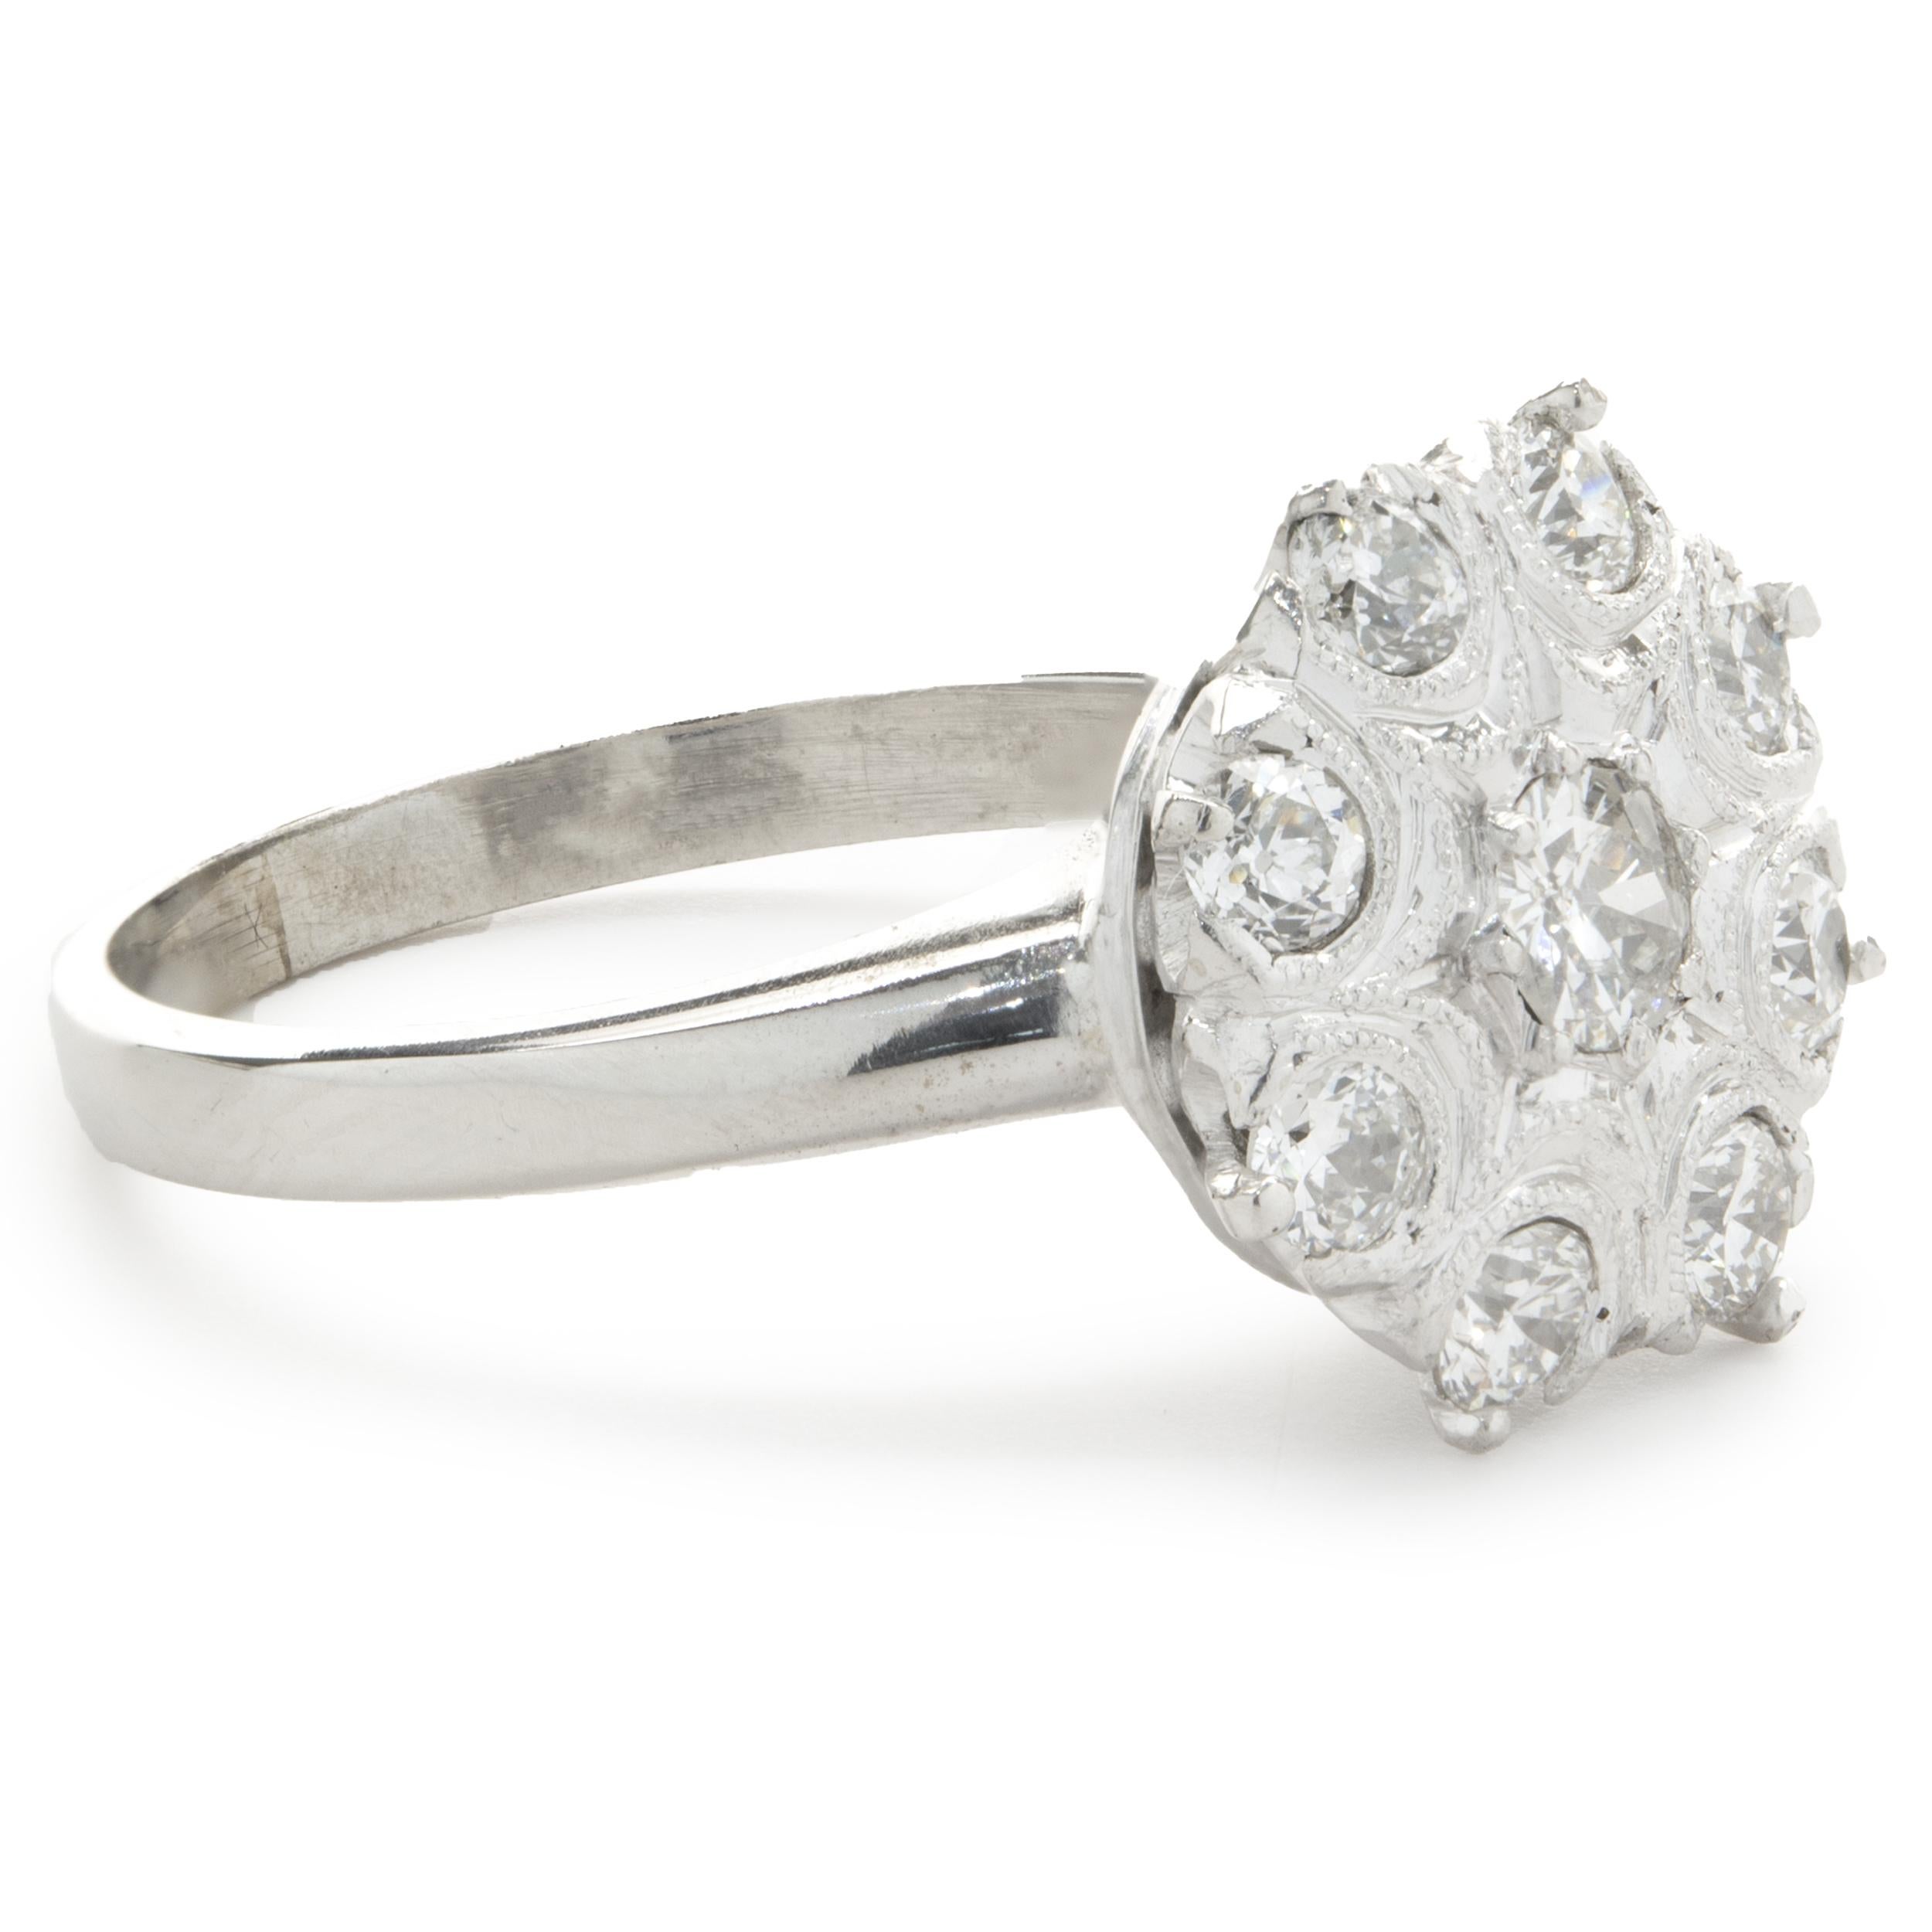 Designer: Custom
Material: 14k White Gold
Diamonds: 9 round brilliant cut = 0.45cttw
Color: H
Clarity: SI1
Size: 7 (complimentary sizing available)
Weight: 4.34 grams
